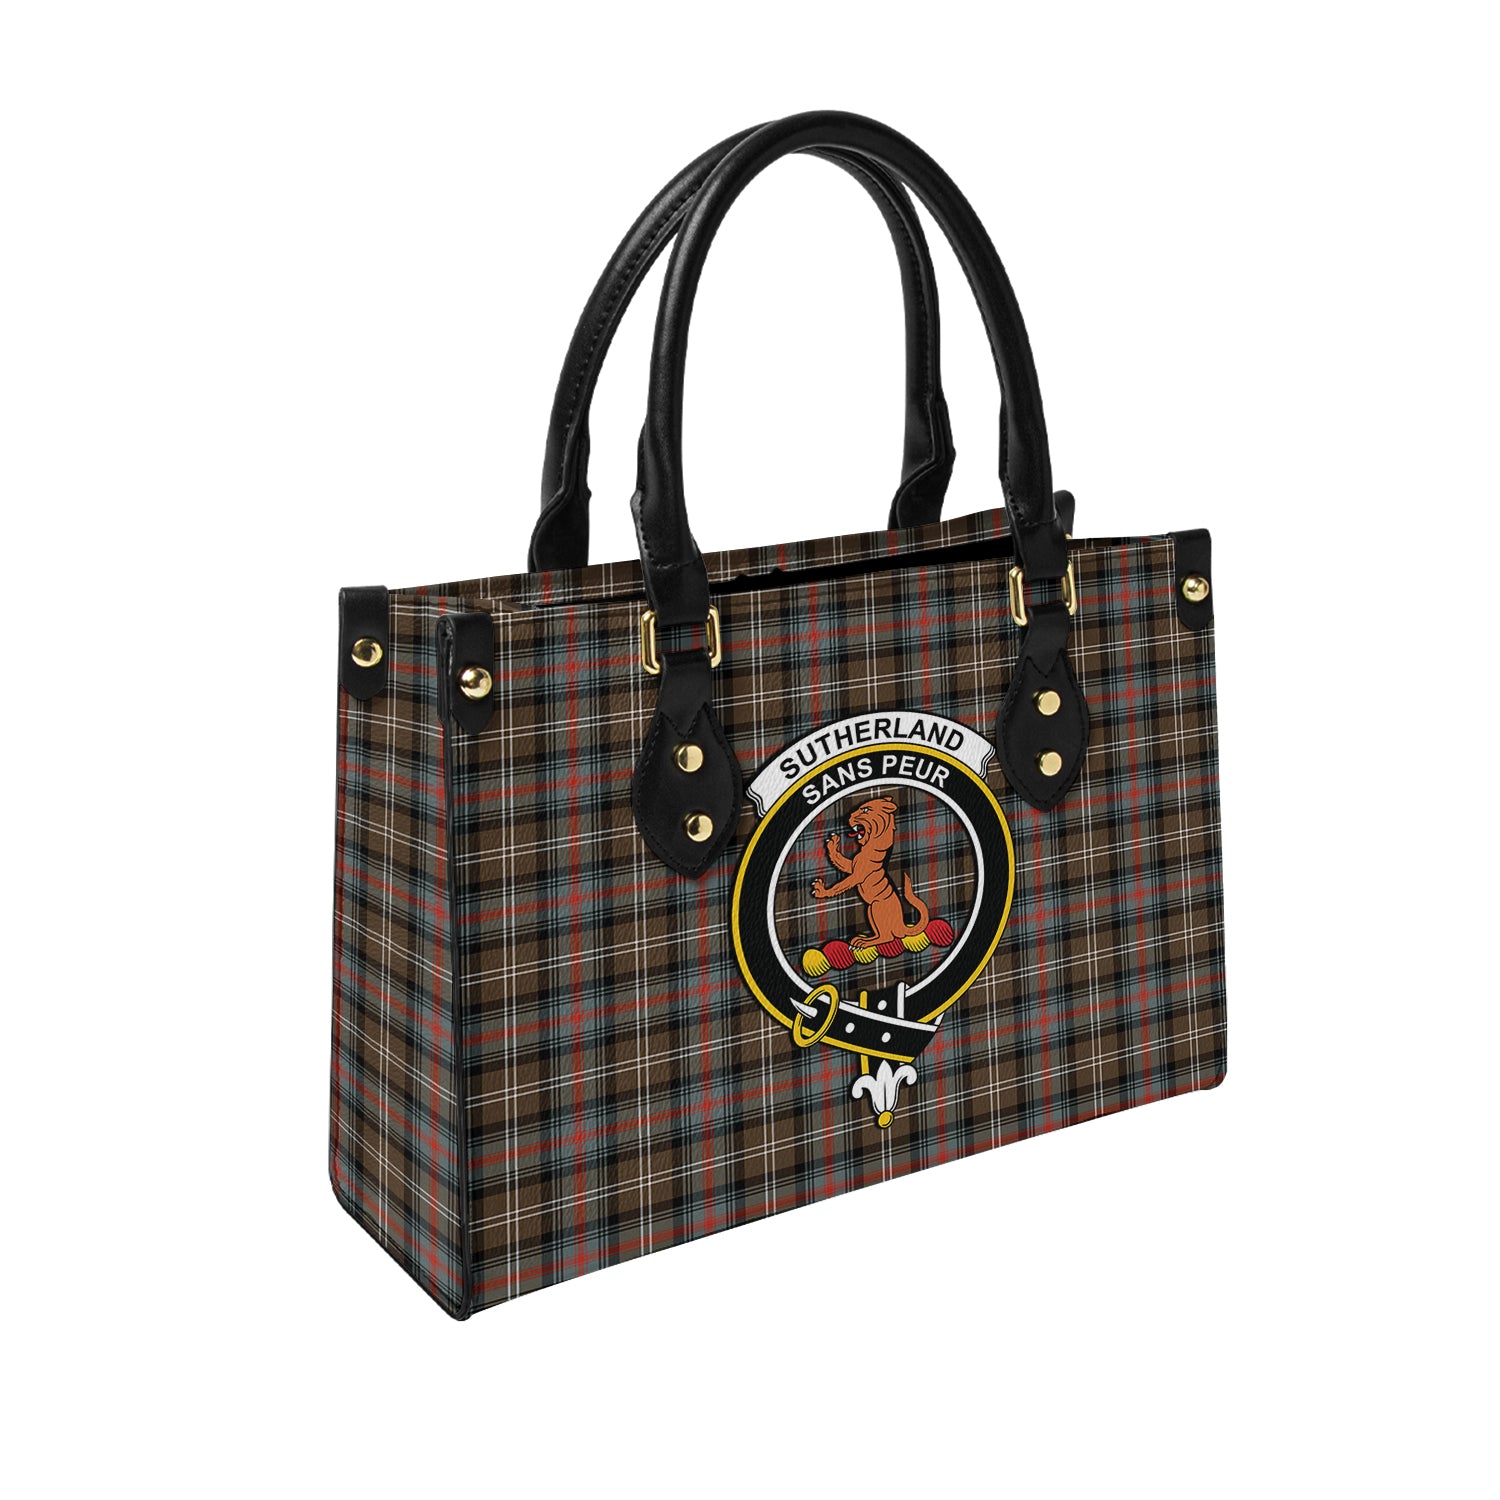 sutherland-weathered-tartan-leather-bag-with-family-crest